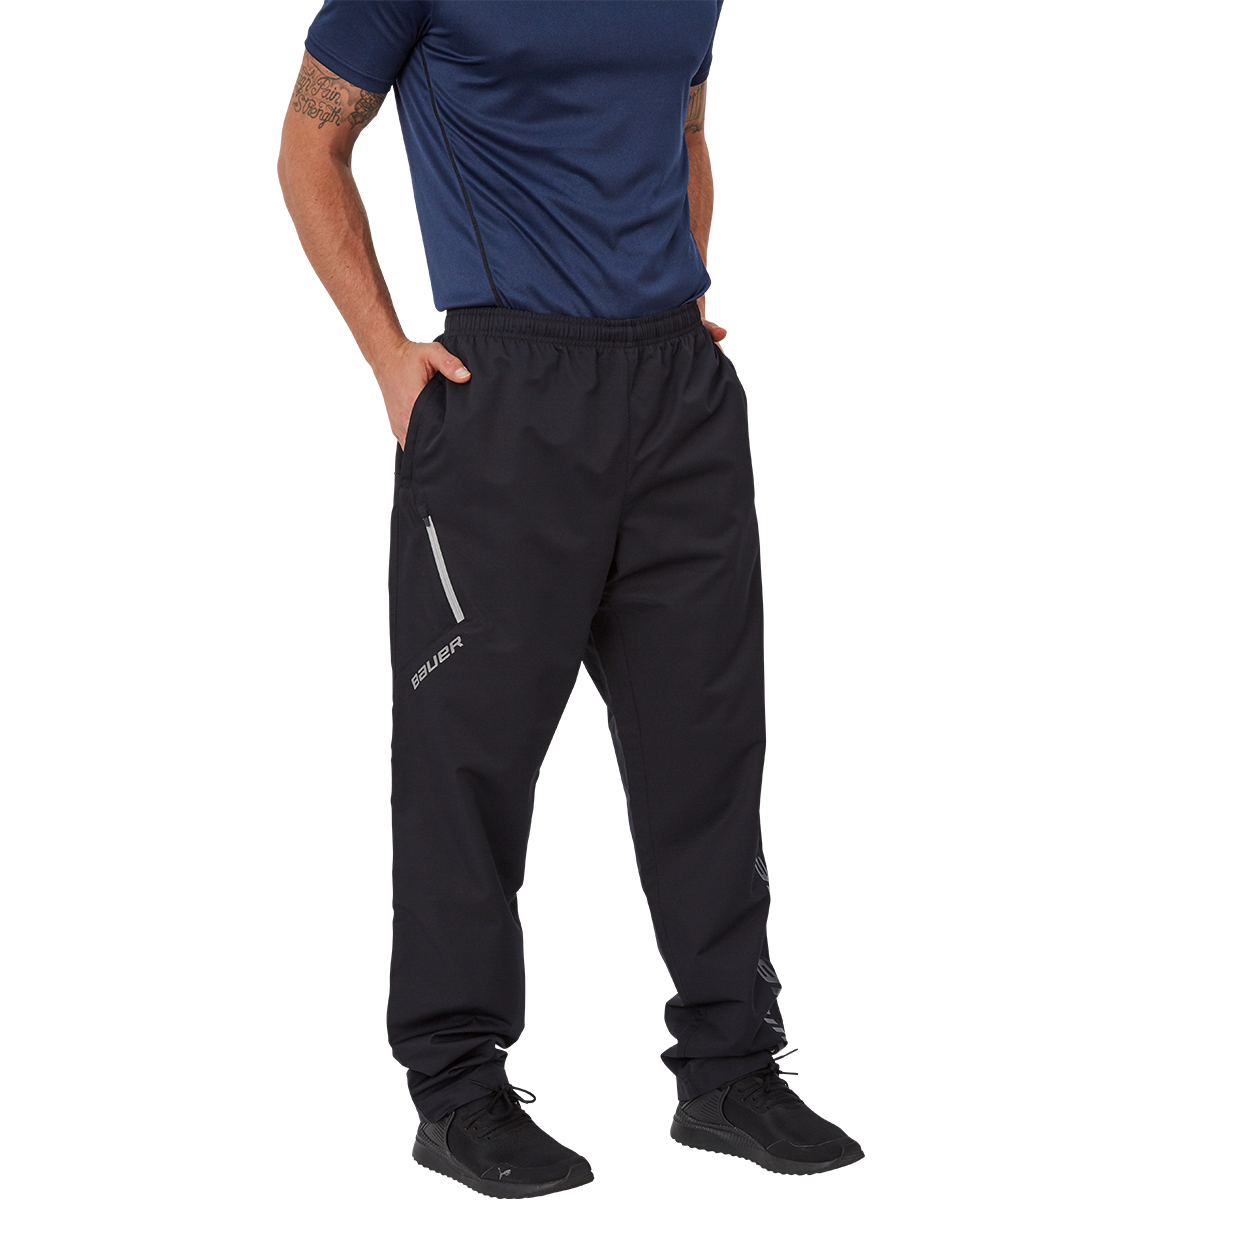 BAUER HOCKEY LIGHTWEIGHT PANT YOUTH